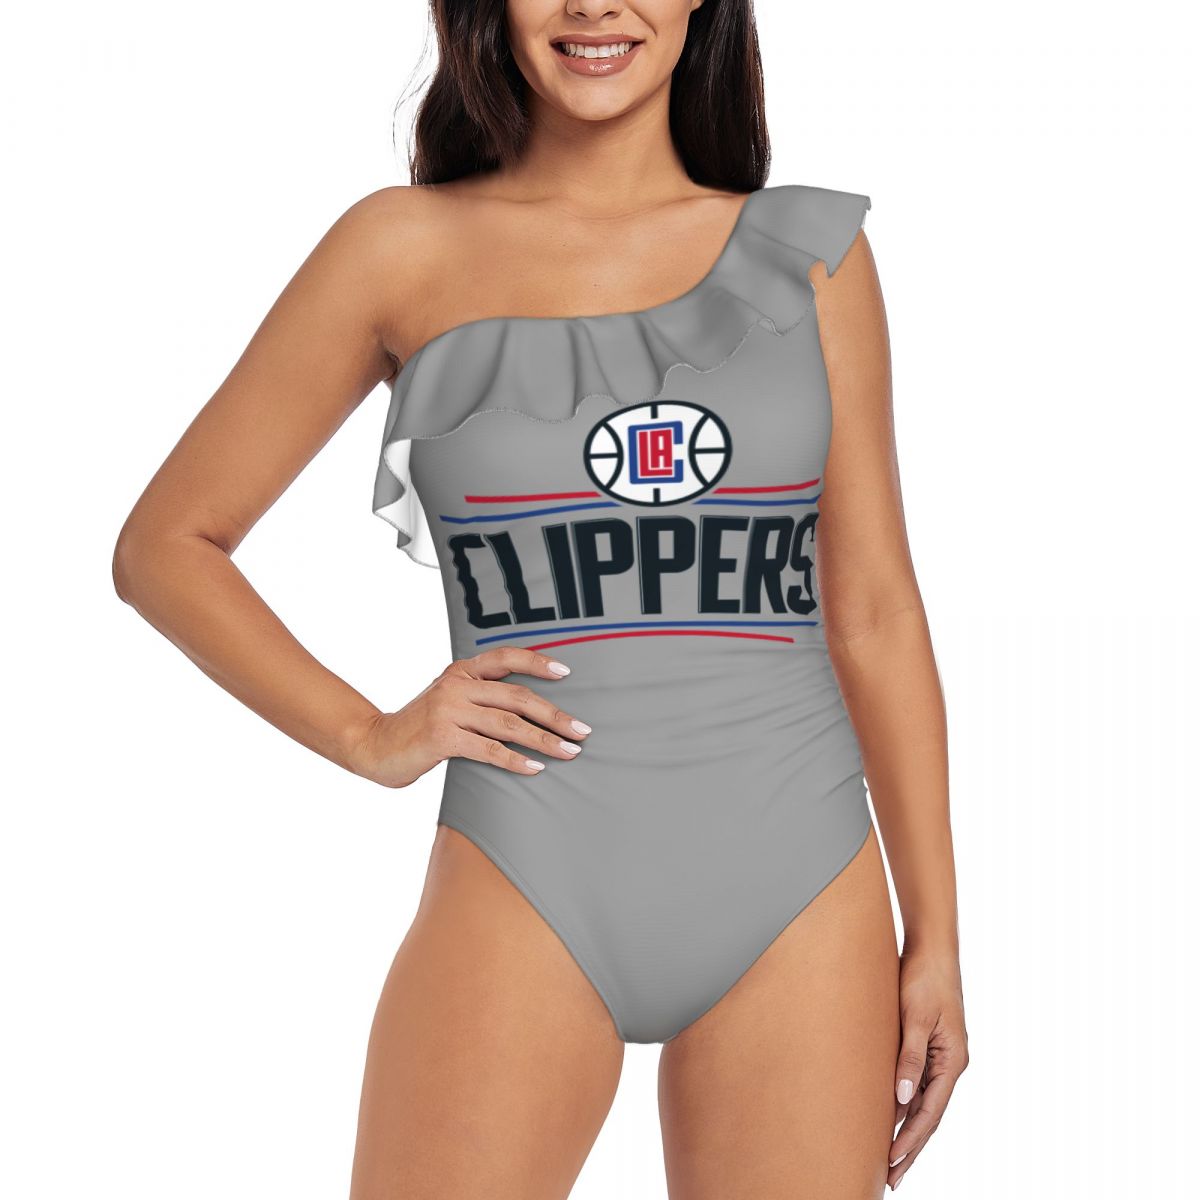 Los Angeles Clippers One Shoulder Asymmetric Ruffle Swimsuits